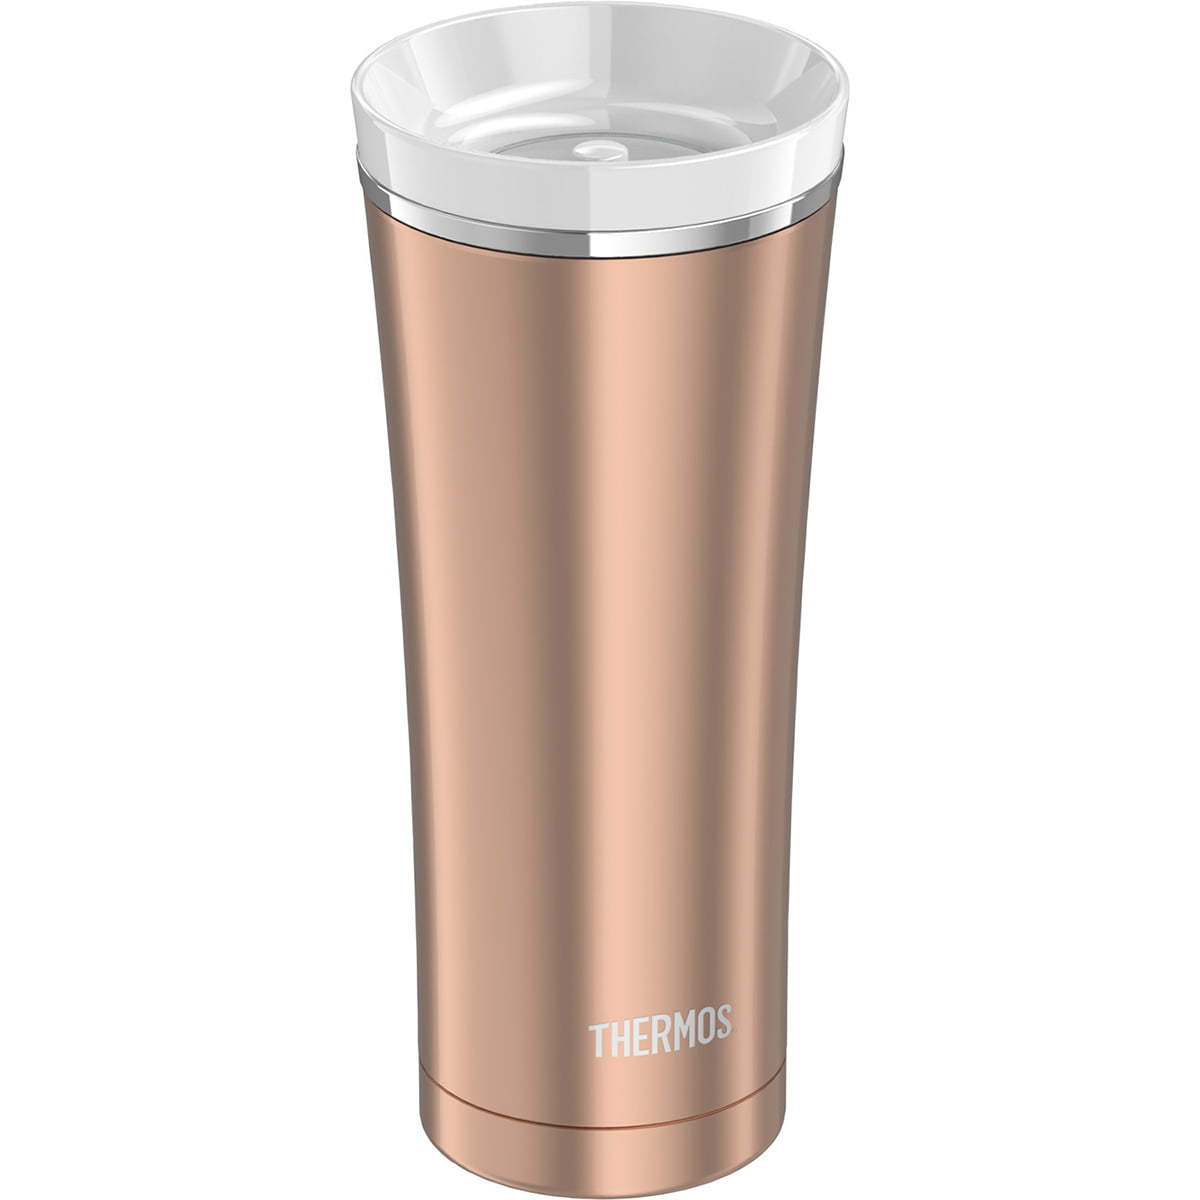 Sipp Vacuum Insulated Stainless Steel Travel Tumbler Thermos 16 oz 